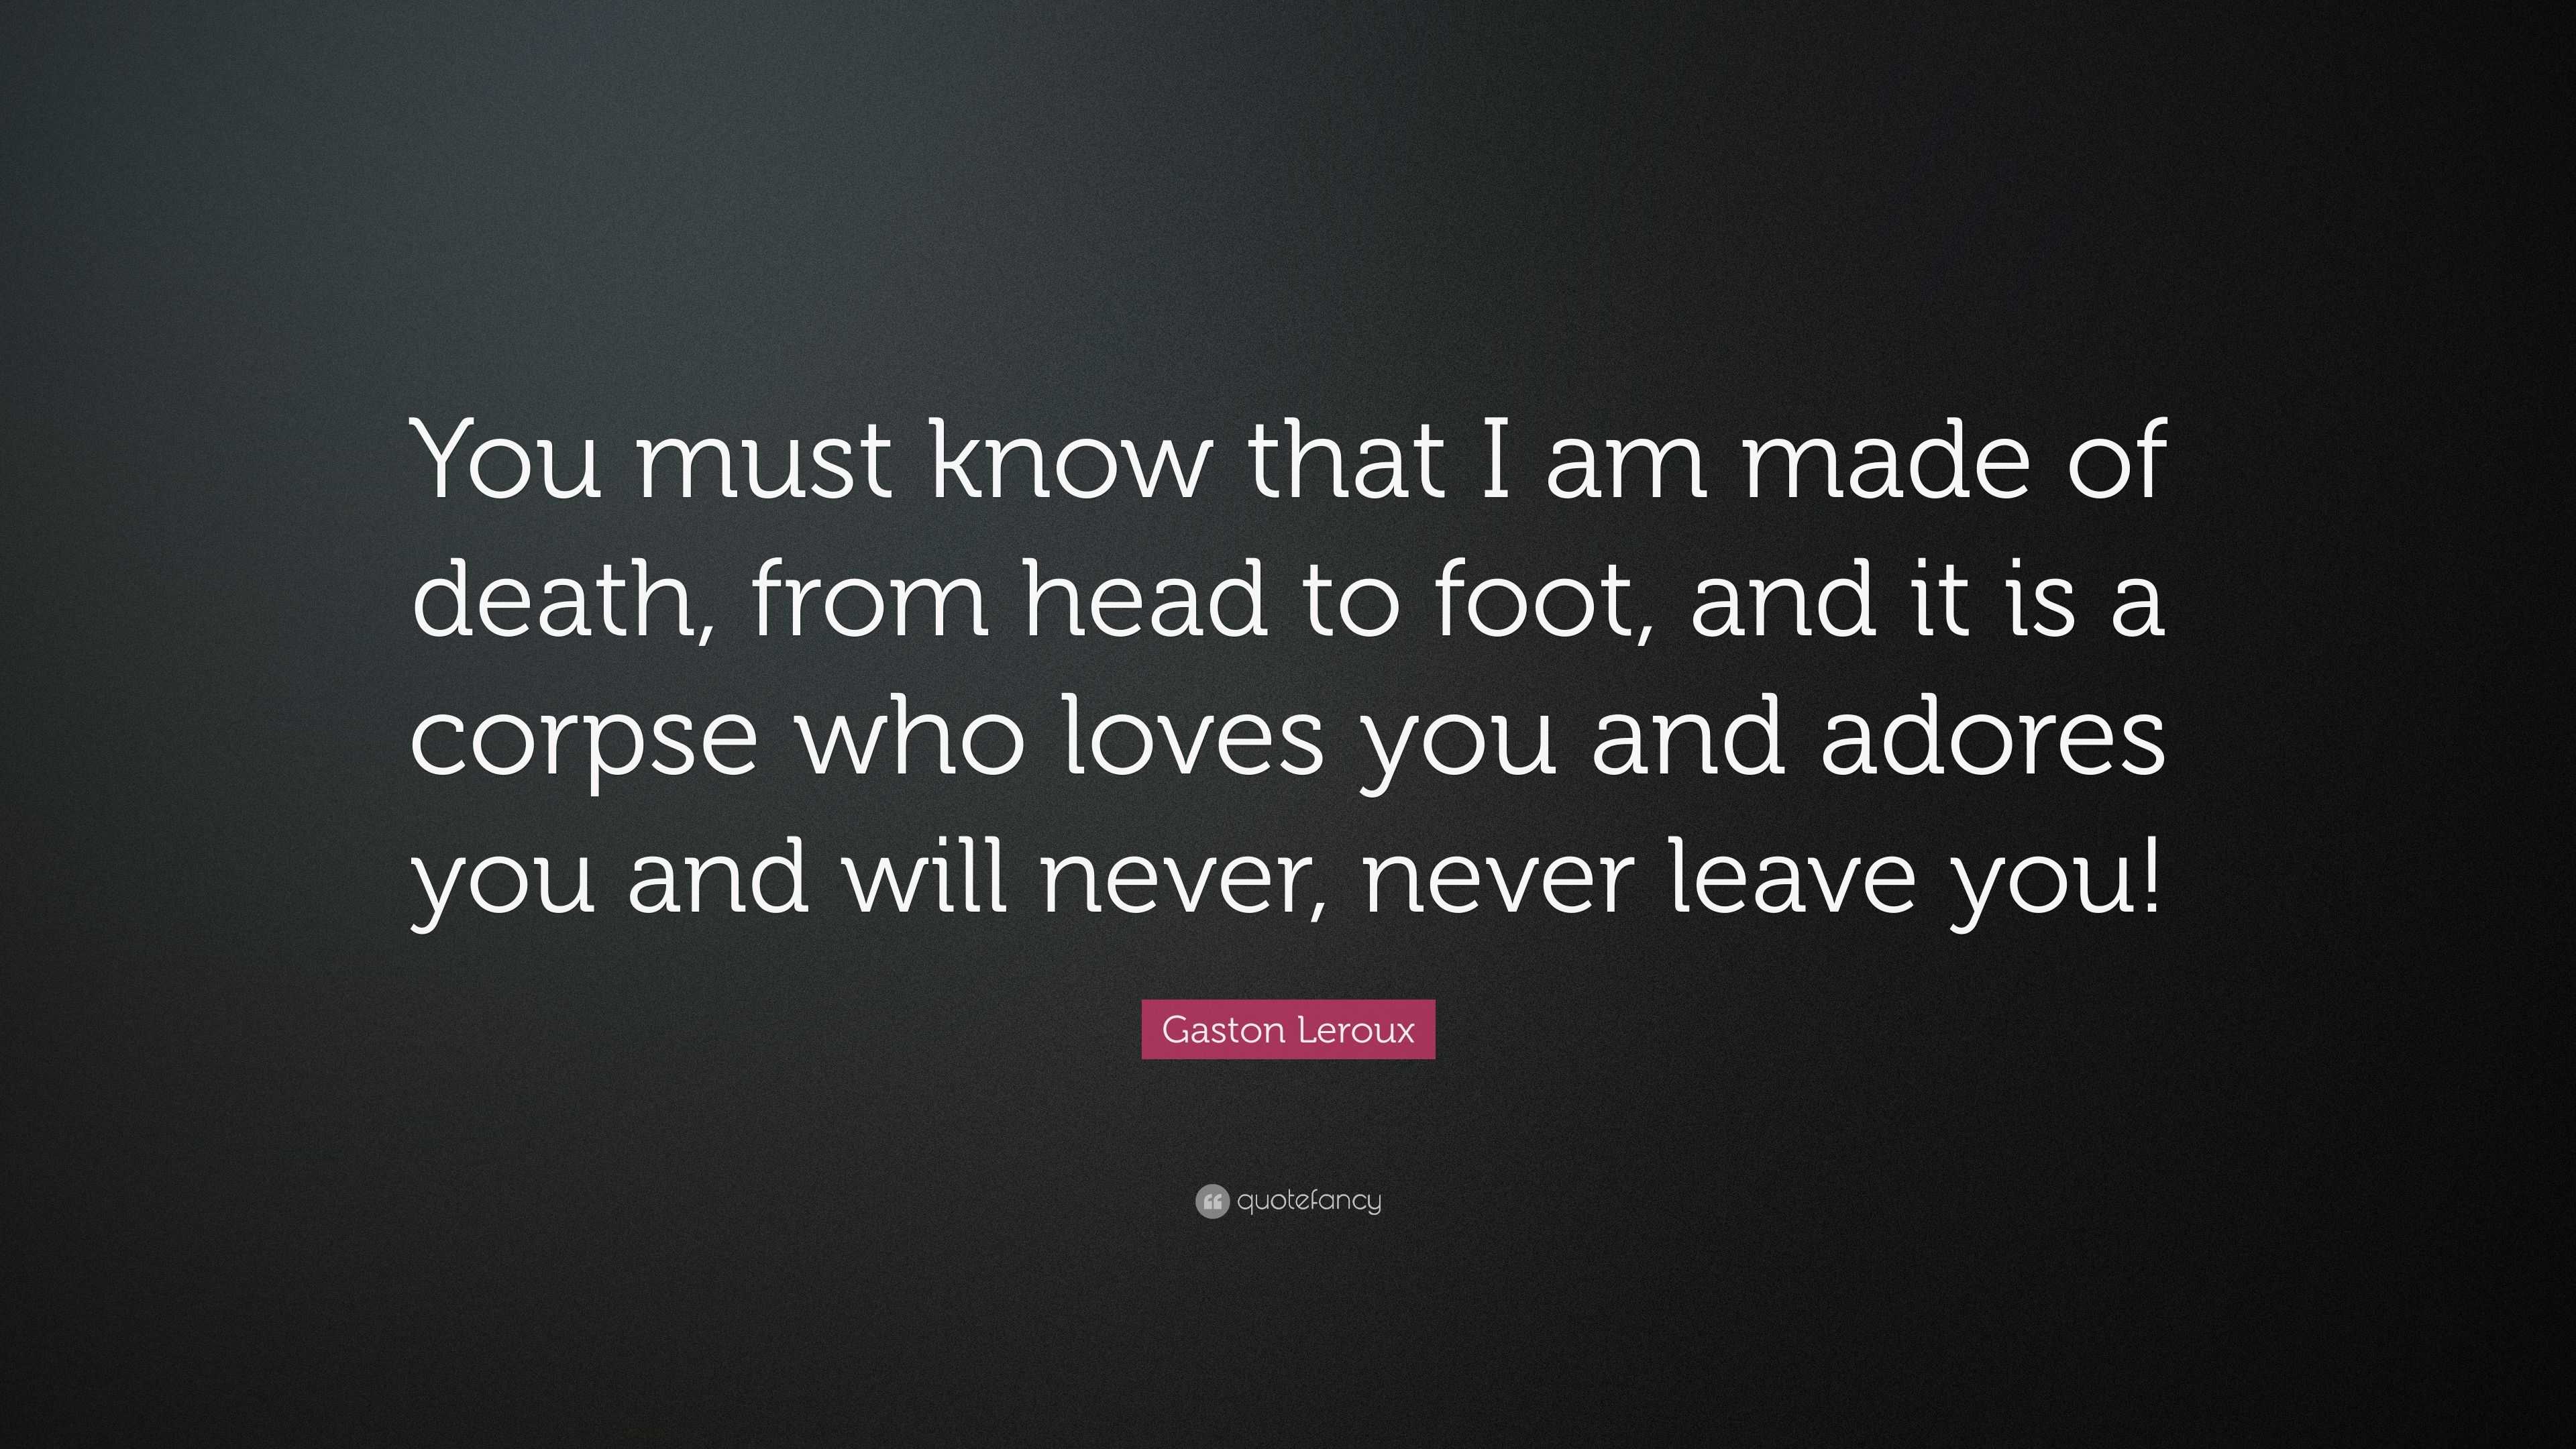 Gaston Leroux Quote: “You must know that I am made of death, from head ...